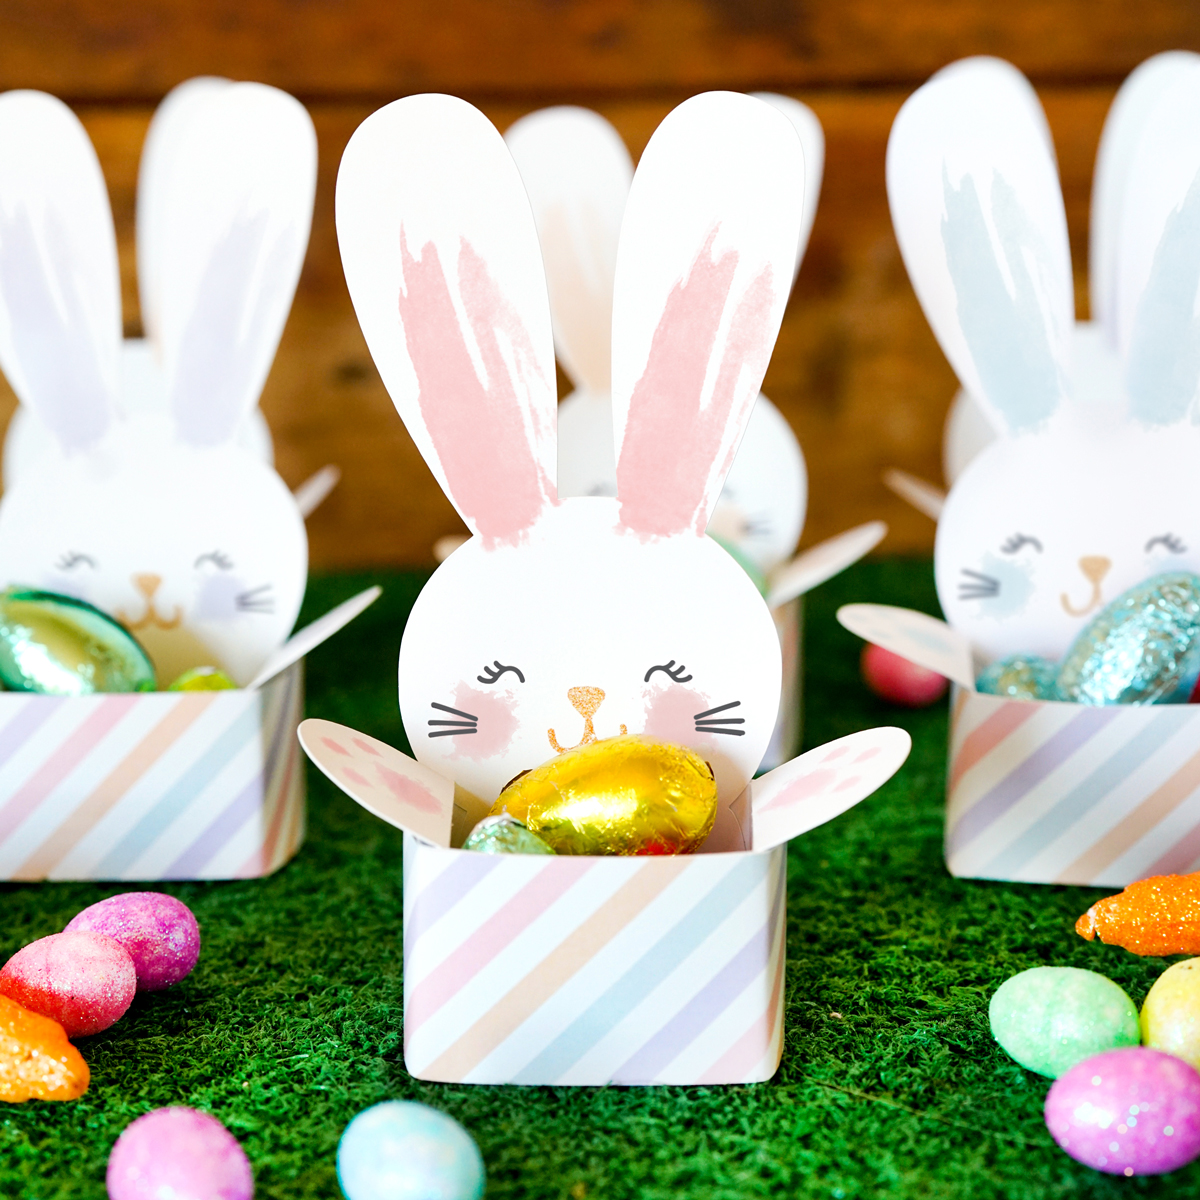 We also have a. printable Easter egg hunt treat box. in the shape of a swee...